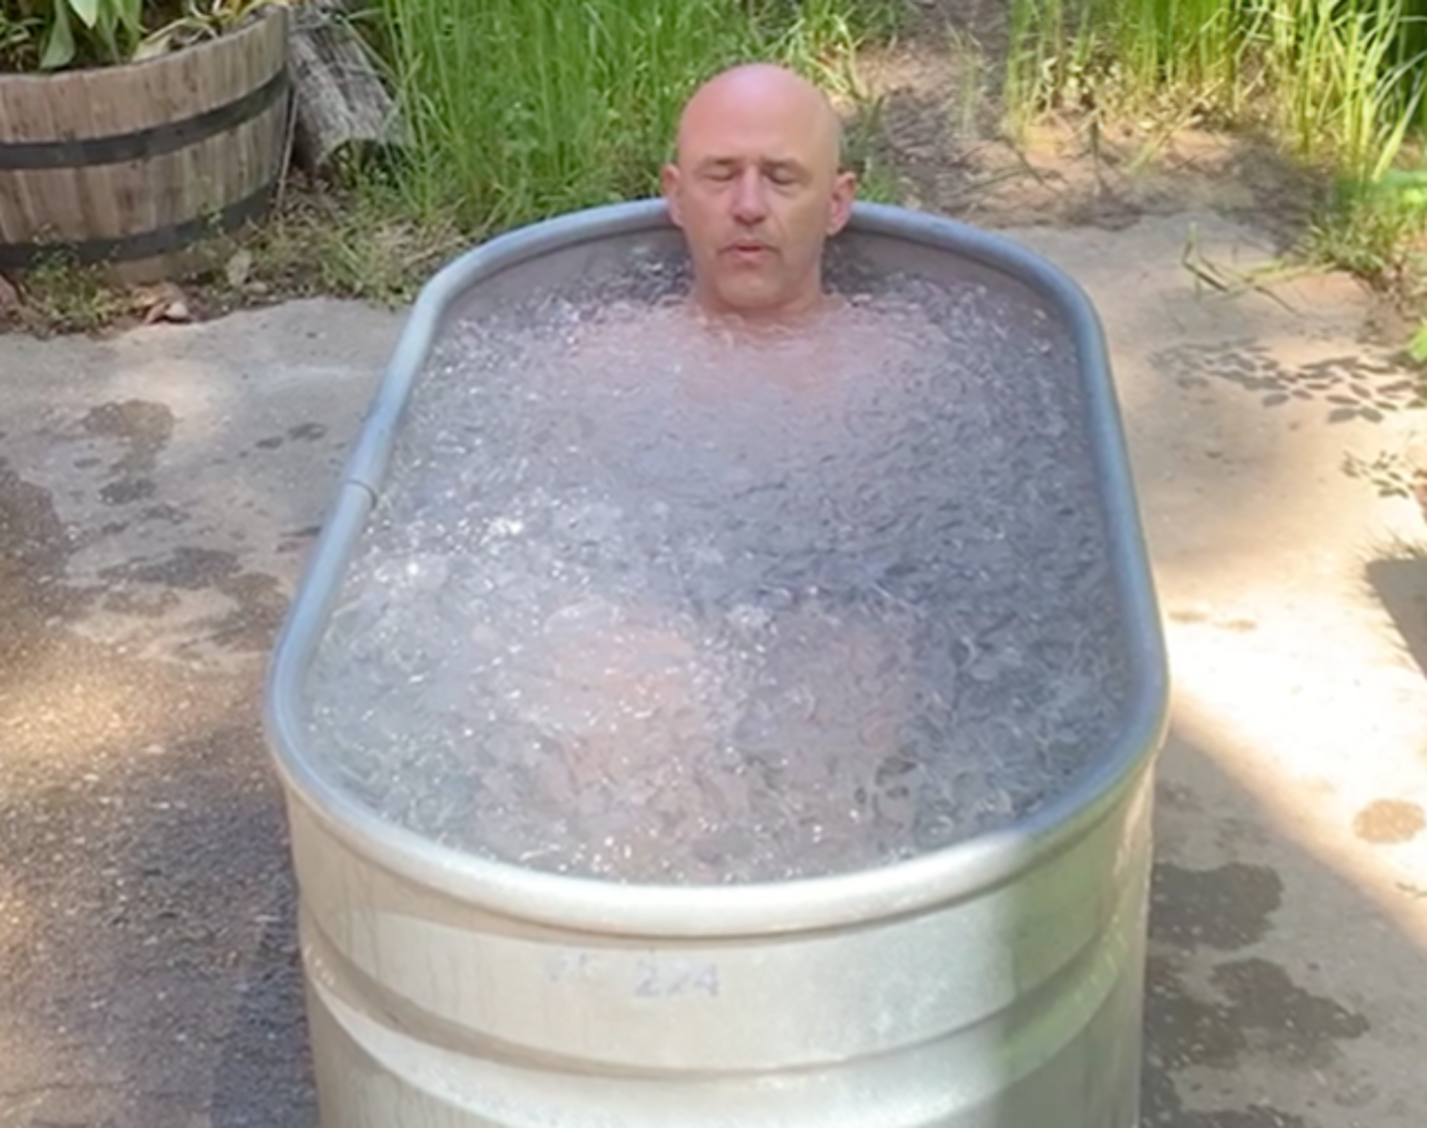 Michael Westgate, practicing cold exposure for stress management